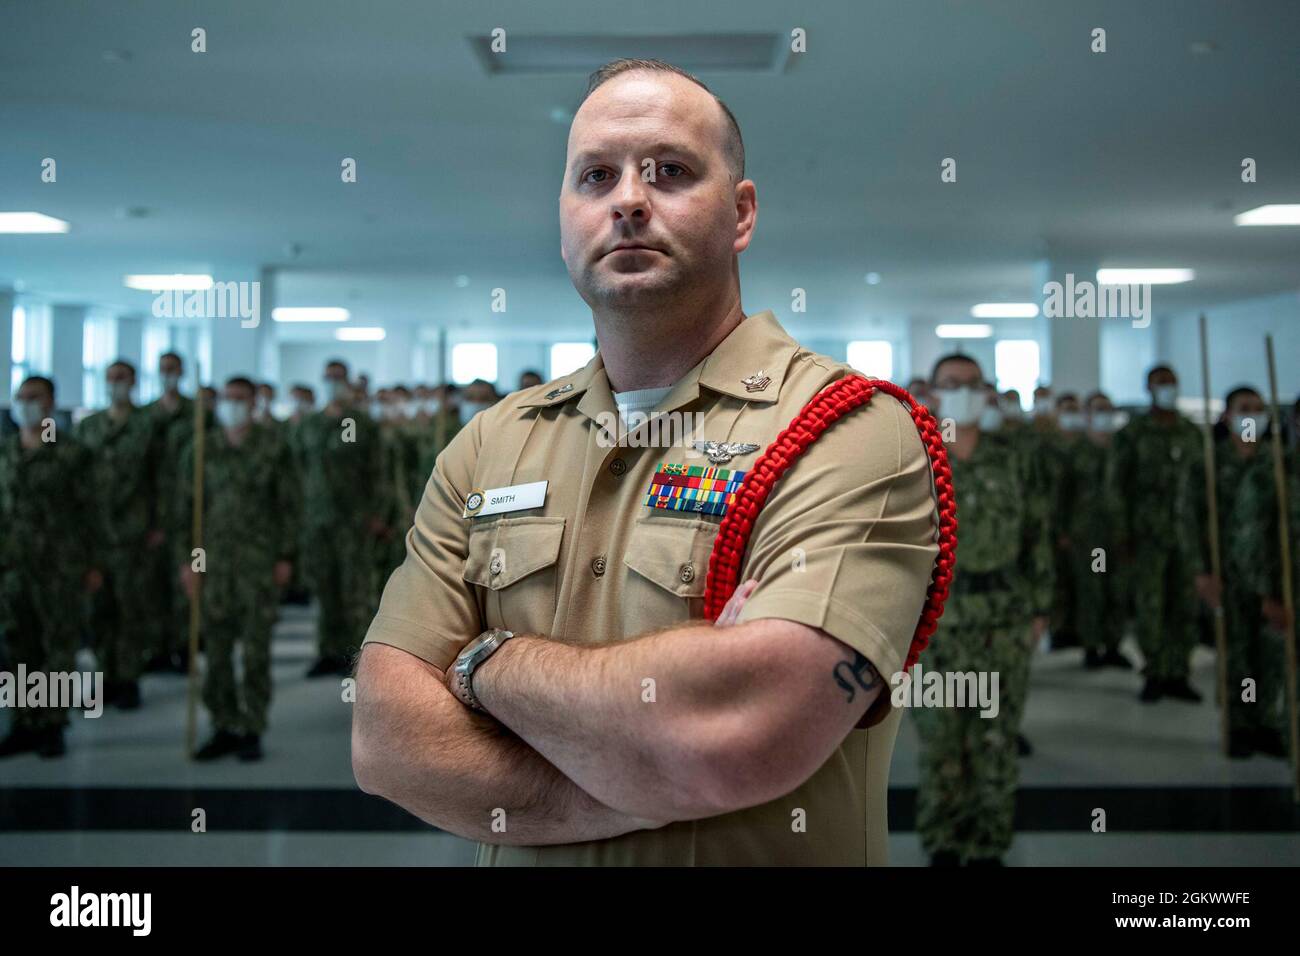 Aviation Boatswain’s Mate (Handling) 1st Class Benjamin Smith, a recruit division commander, poses for a portrait photo in front of his division at Recruit Training Command. More than 40,000 recruits train annually at the Navy's only boot camp. Stock Photo